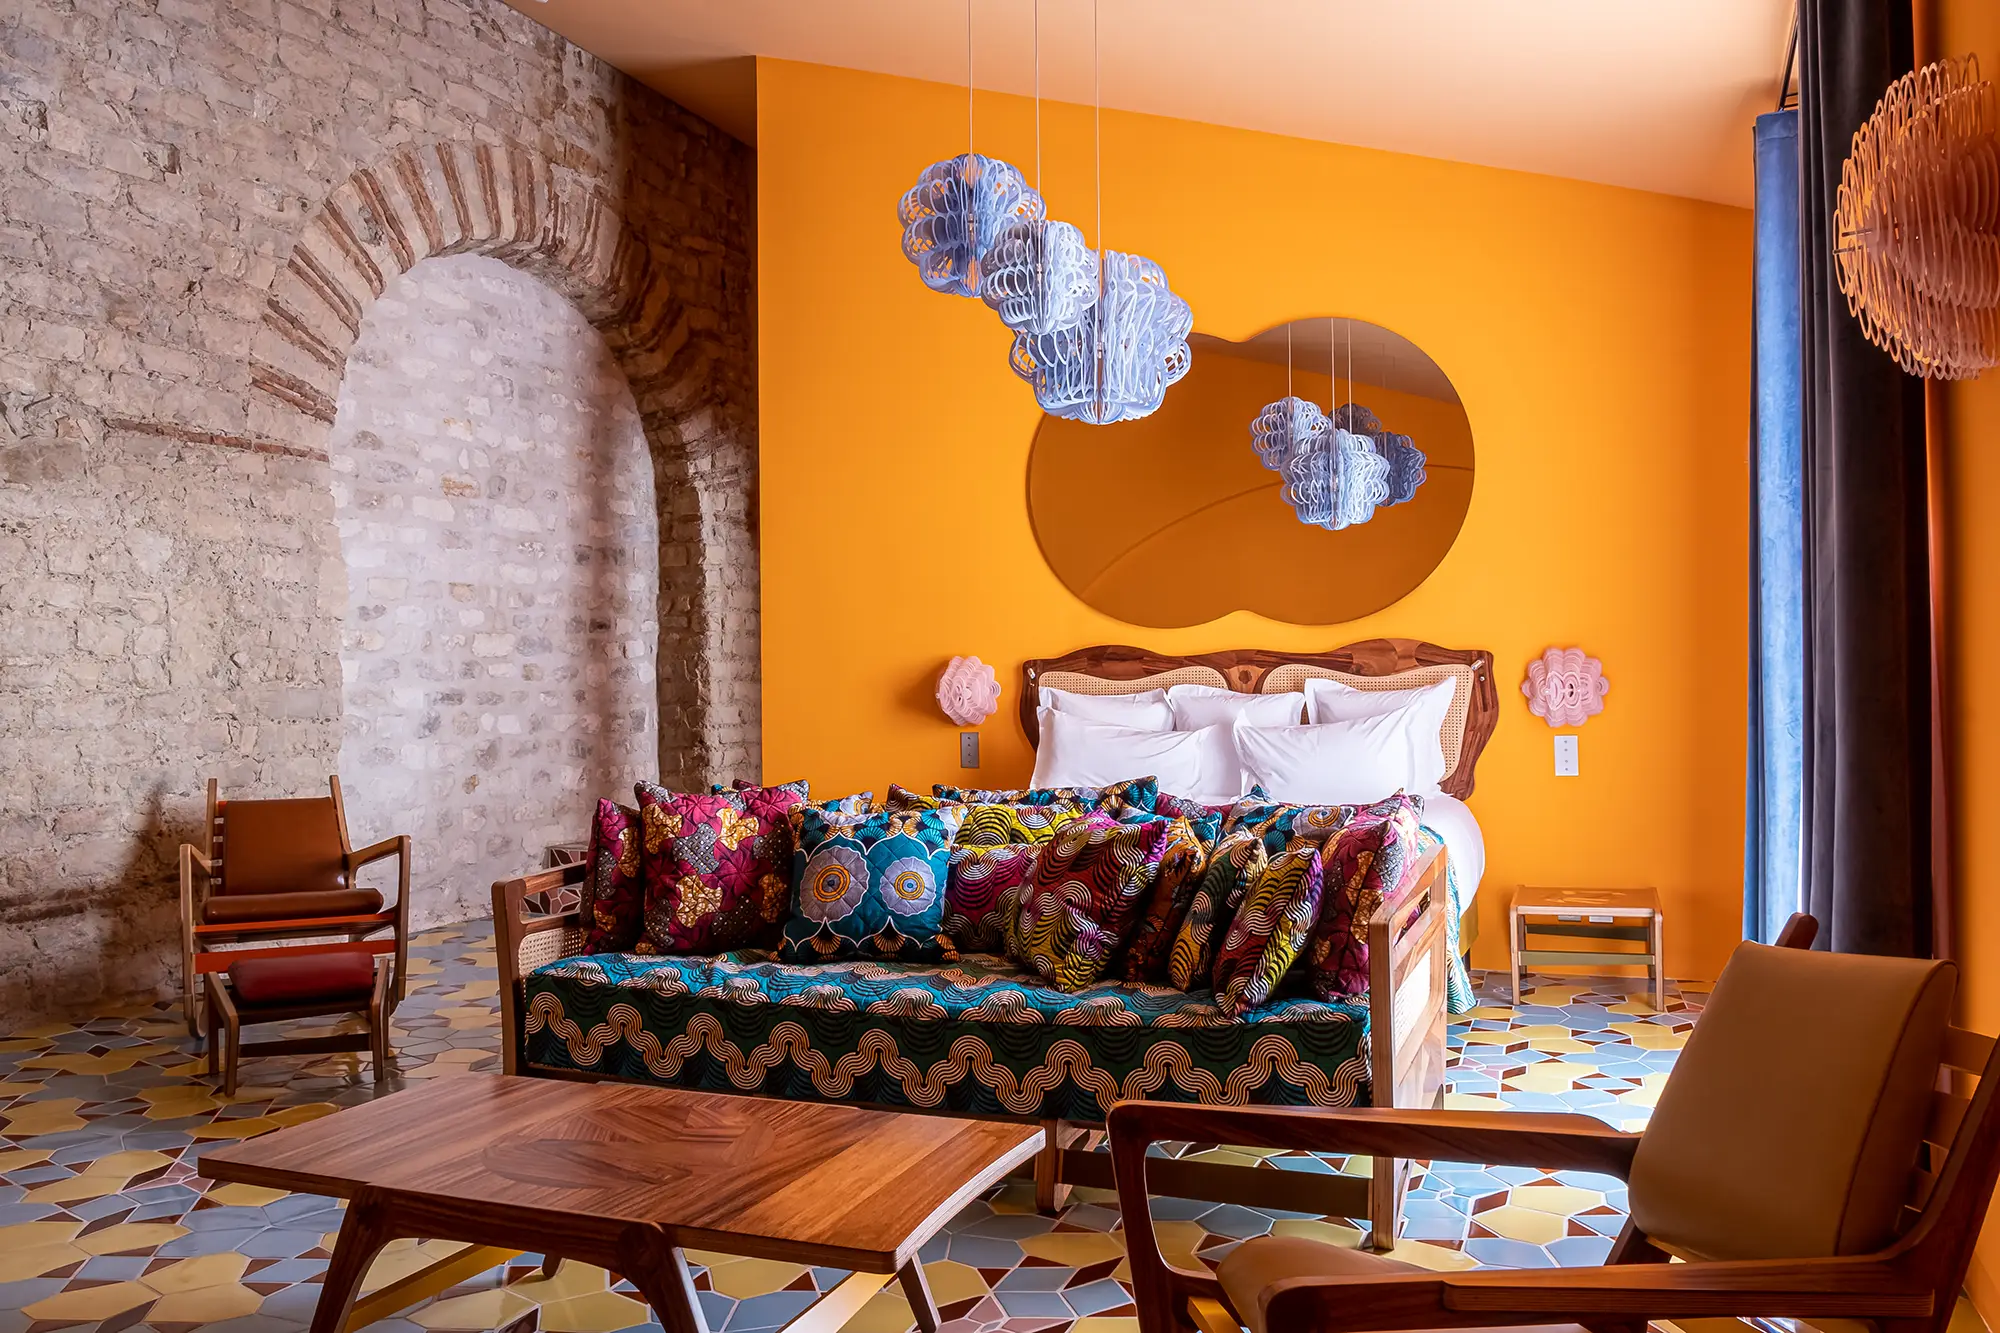 Orange bedroom with a bed in the center of the picture at L'Arlatan. On the left-hand side, a stone wall and a Roman arch.